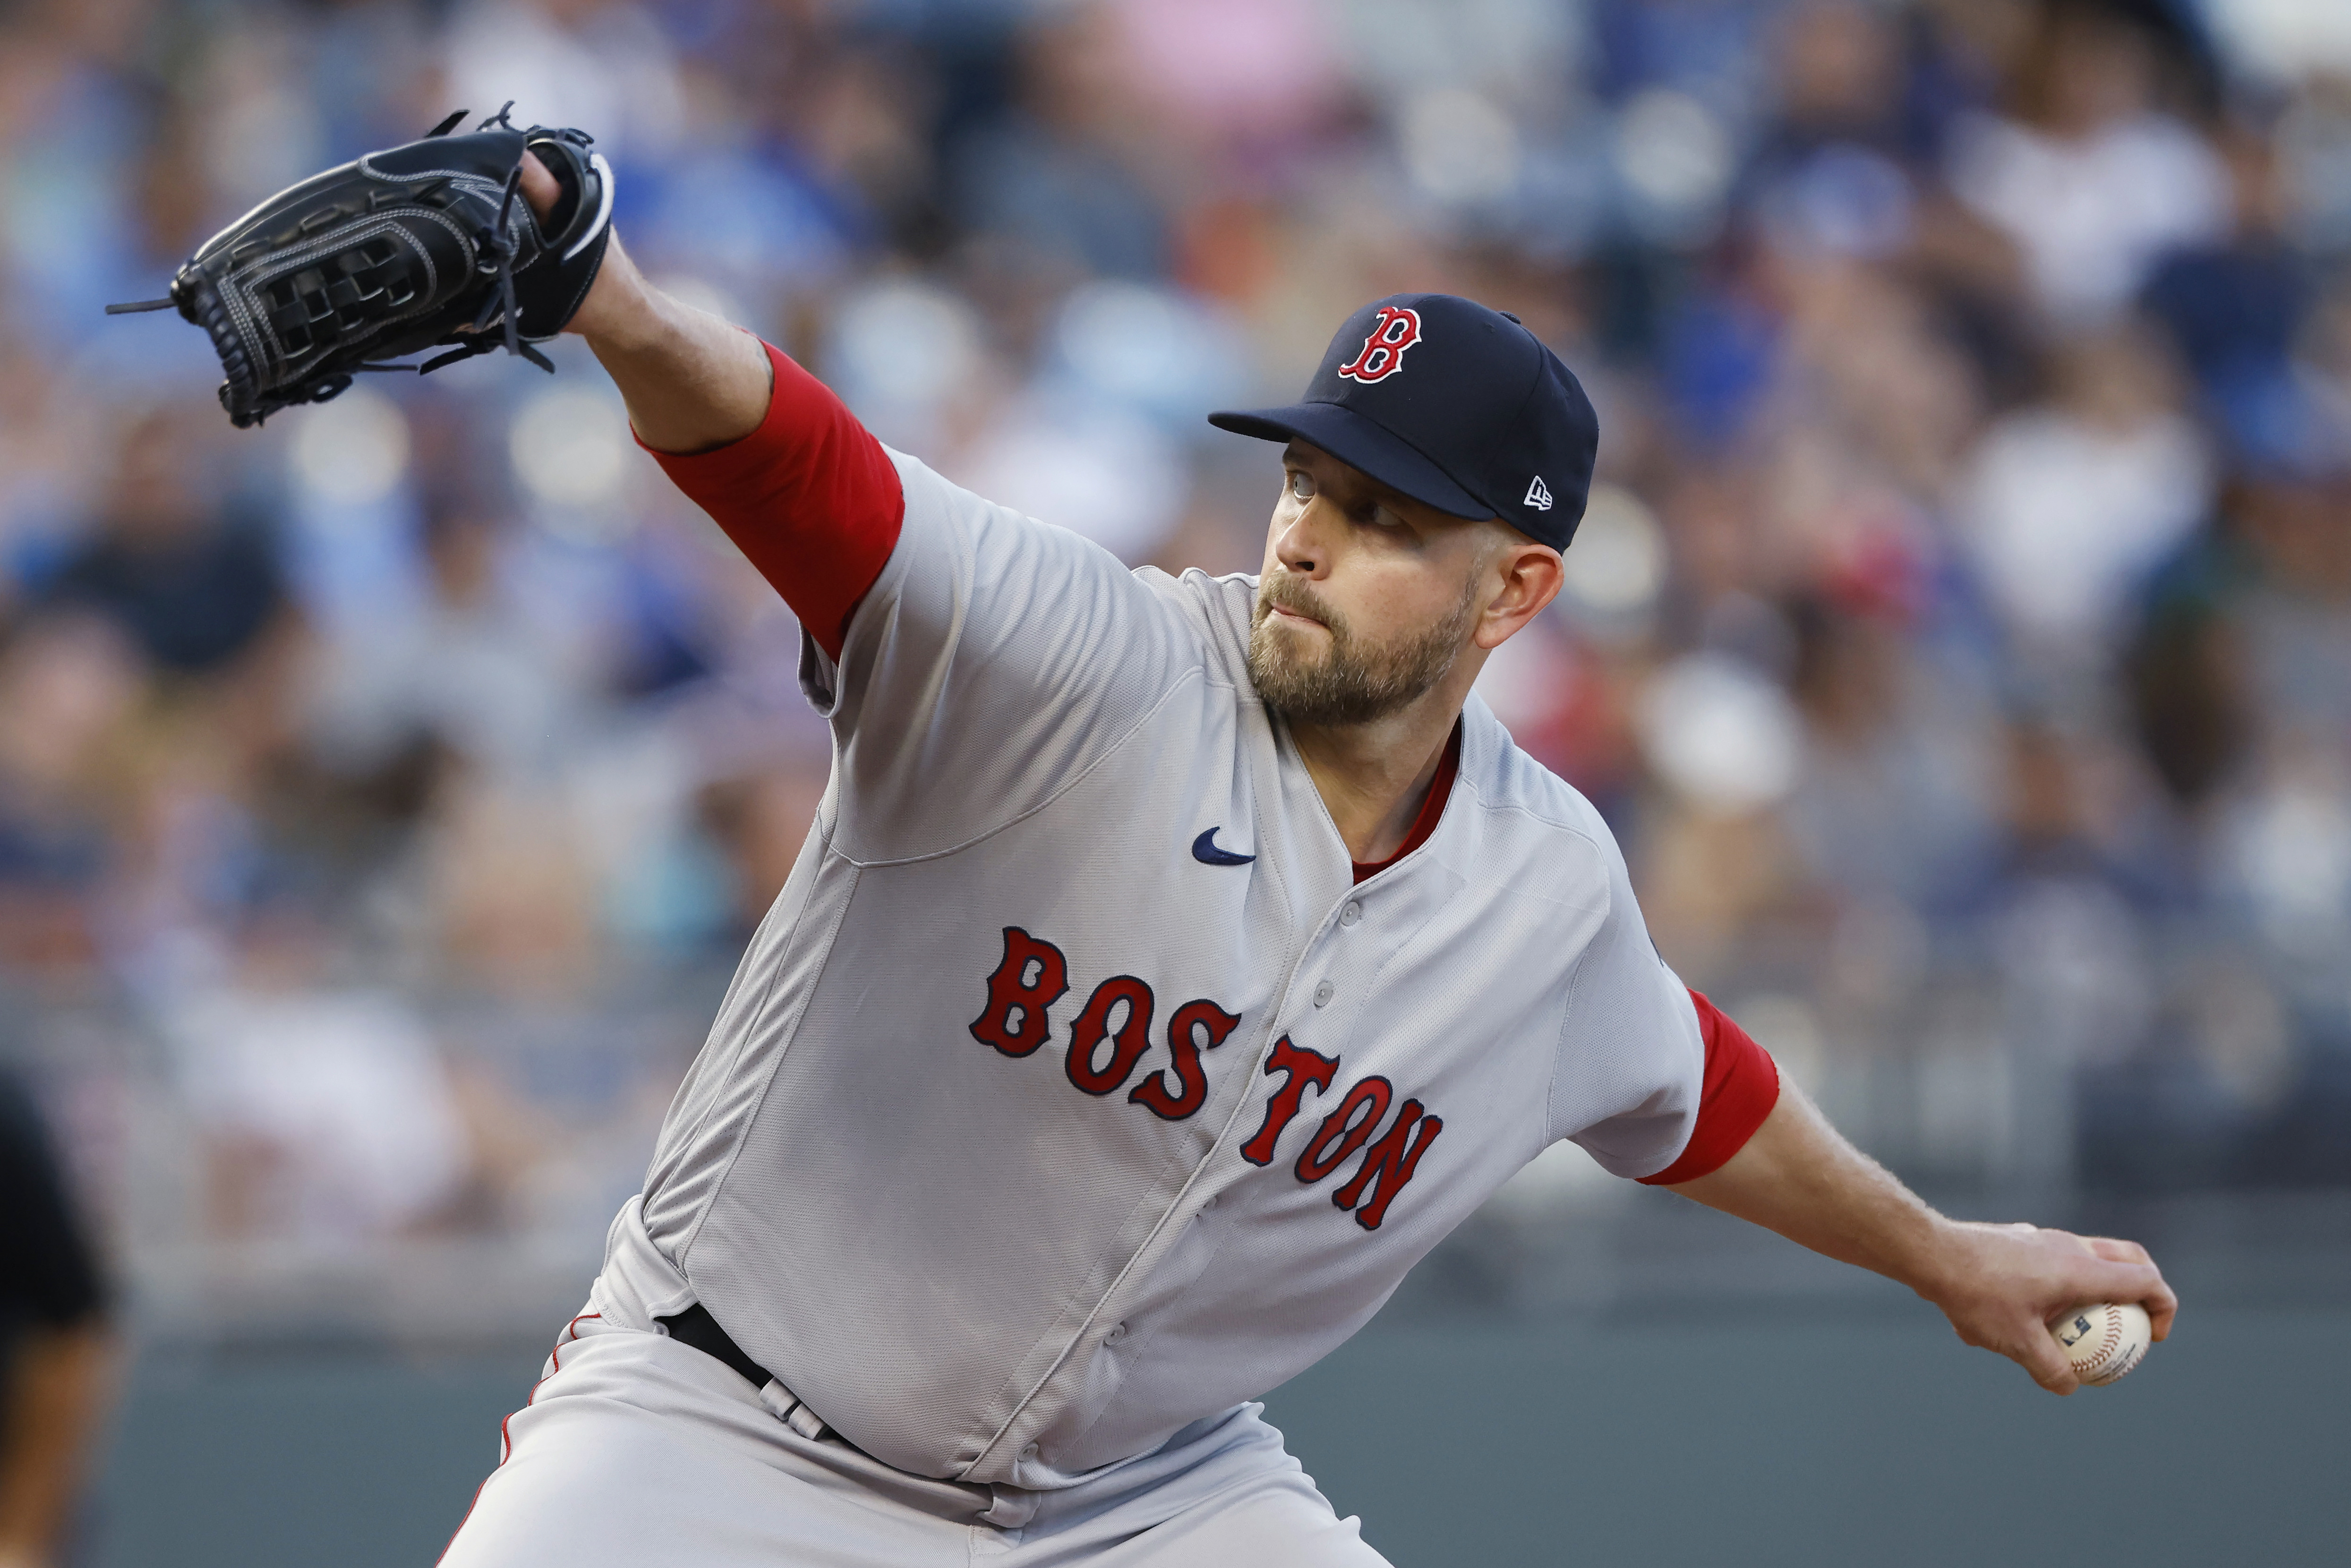 Red Sox snap 5-game losing streak with win over Royals in KC